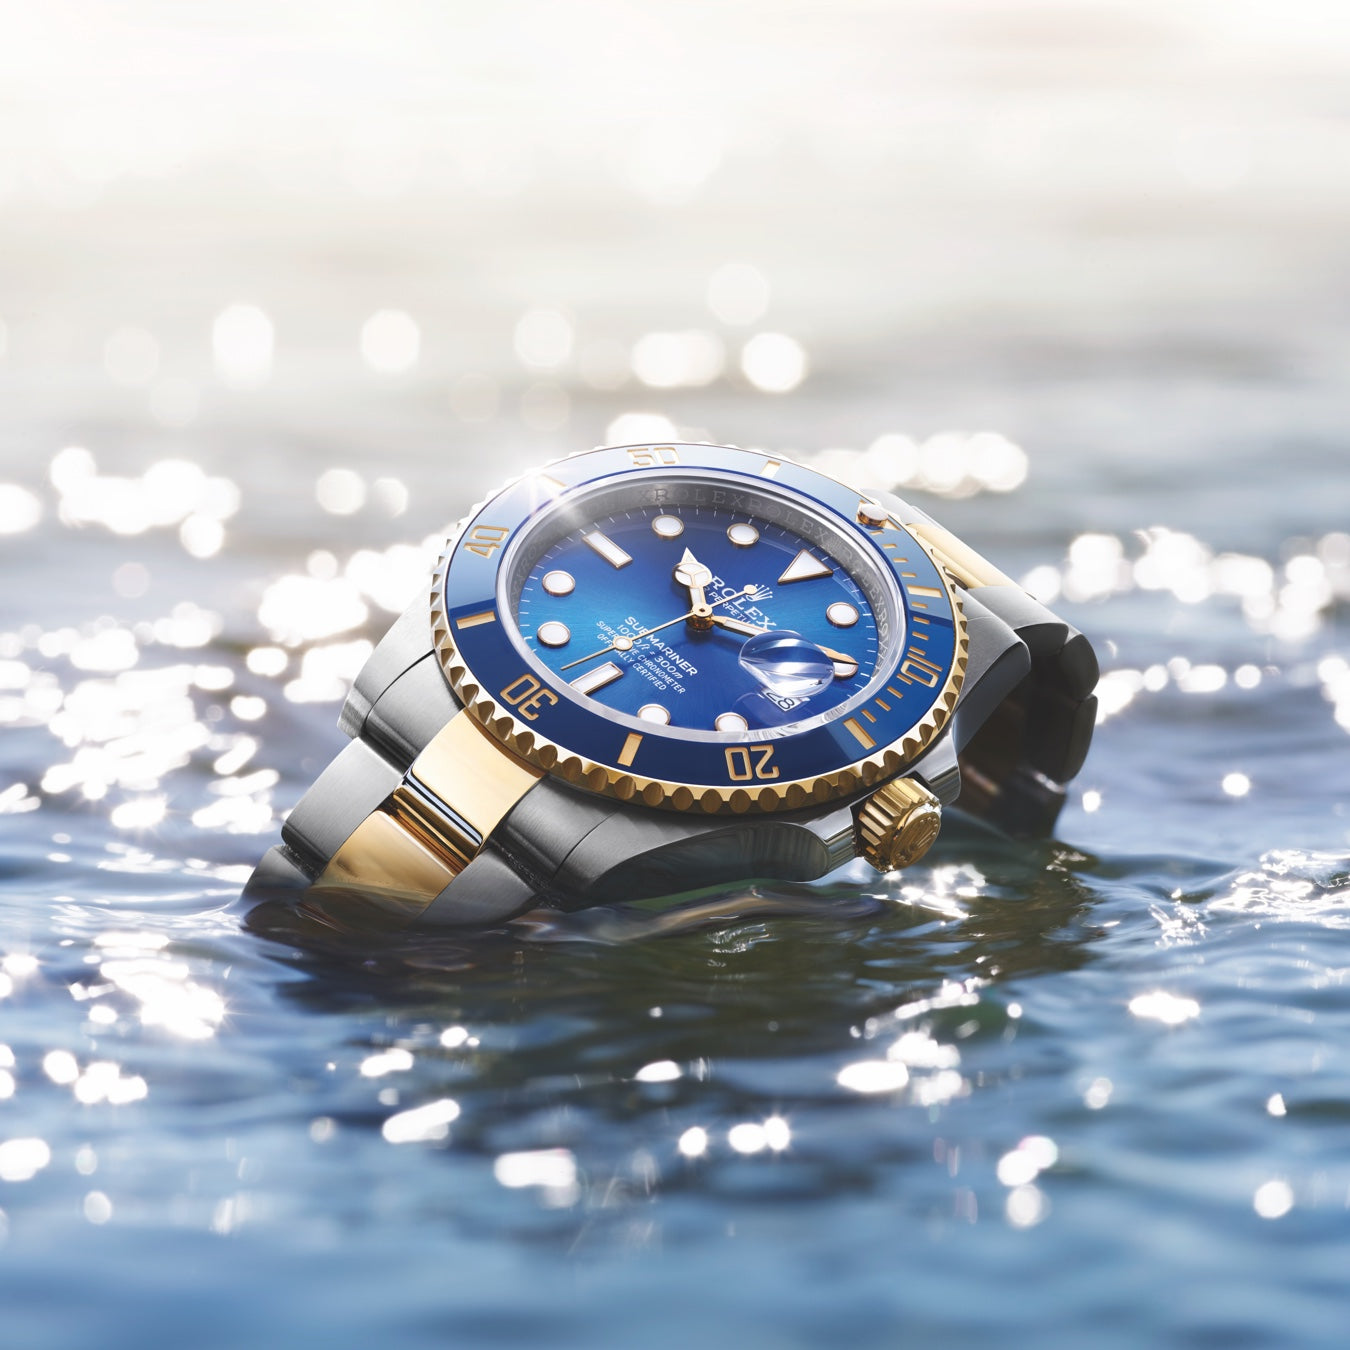 Rolex Submariner with Blue Dial in Sparkling Water